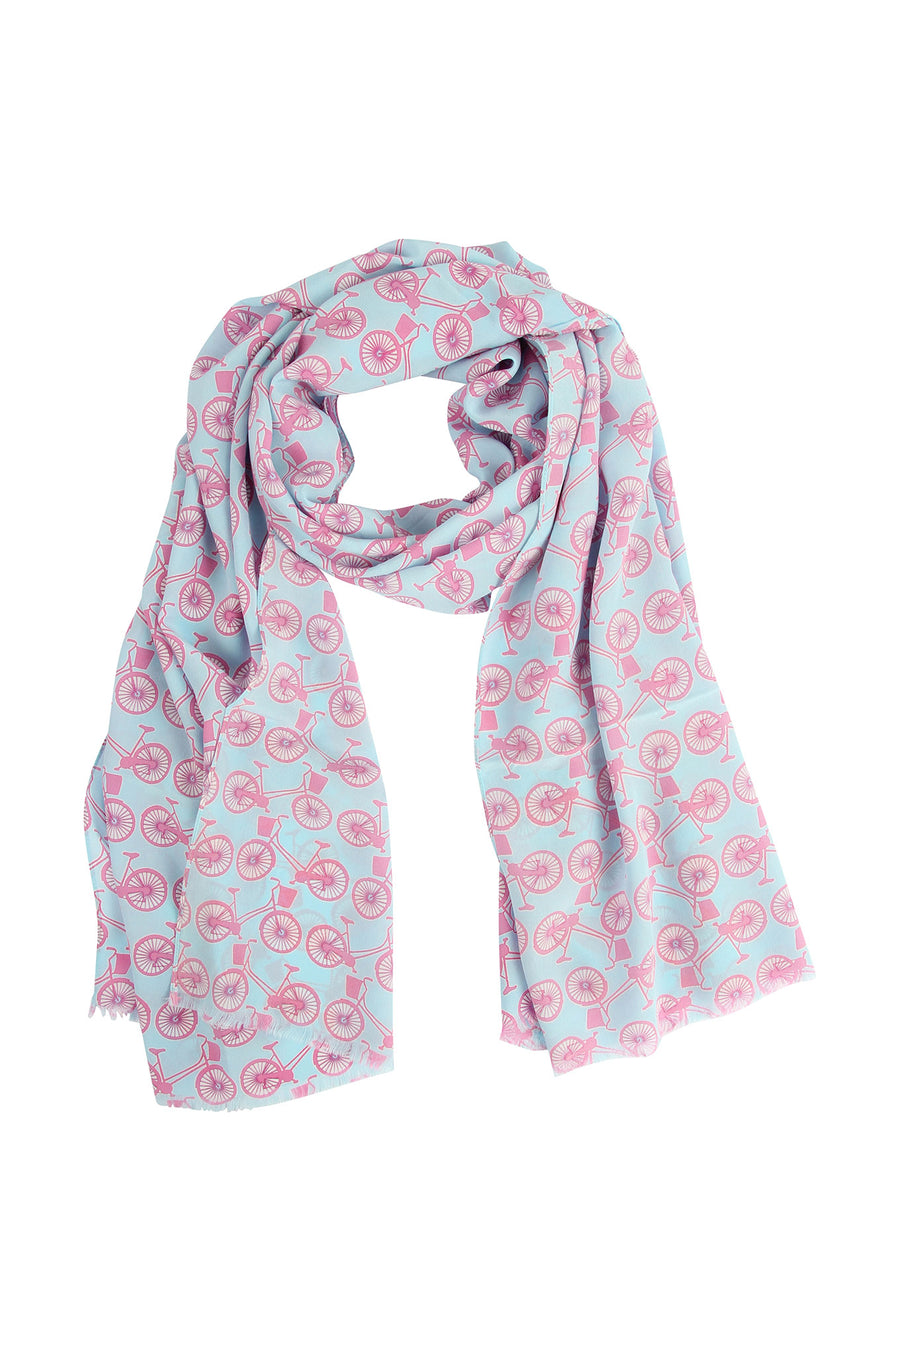 Lotty B Silk Crepe-de-Chine Long Scarf BICYCLE REPEAT - PINK Pasture Bay